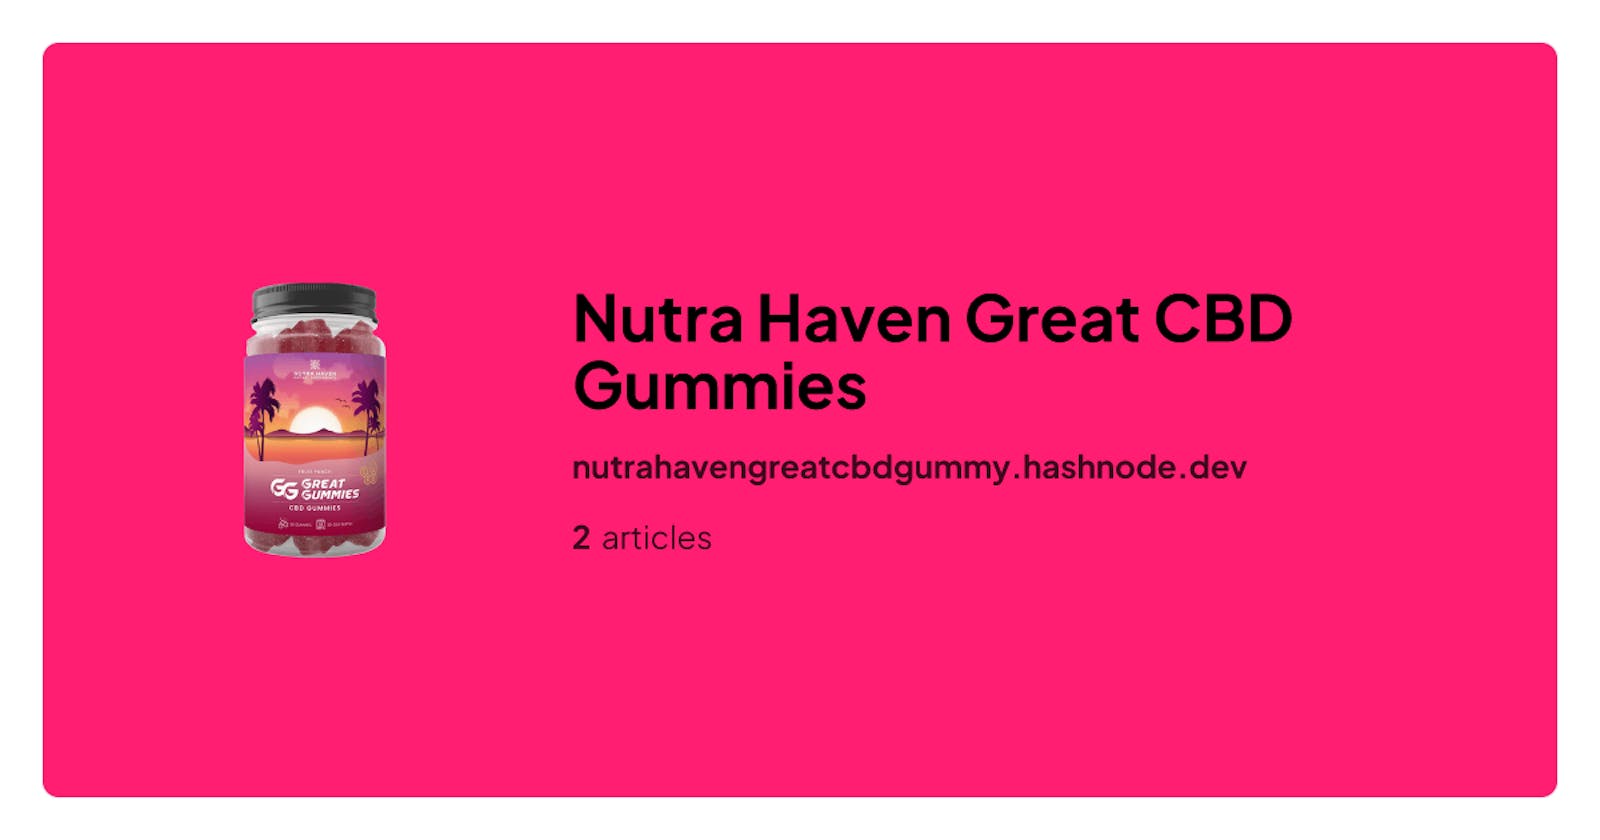 Nutra Haven Great CBD Gummies Review